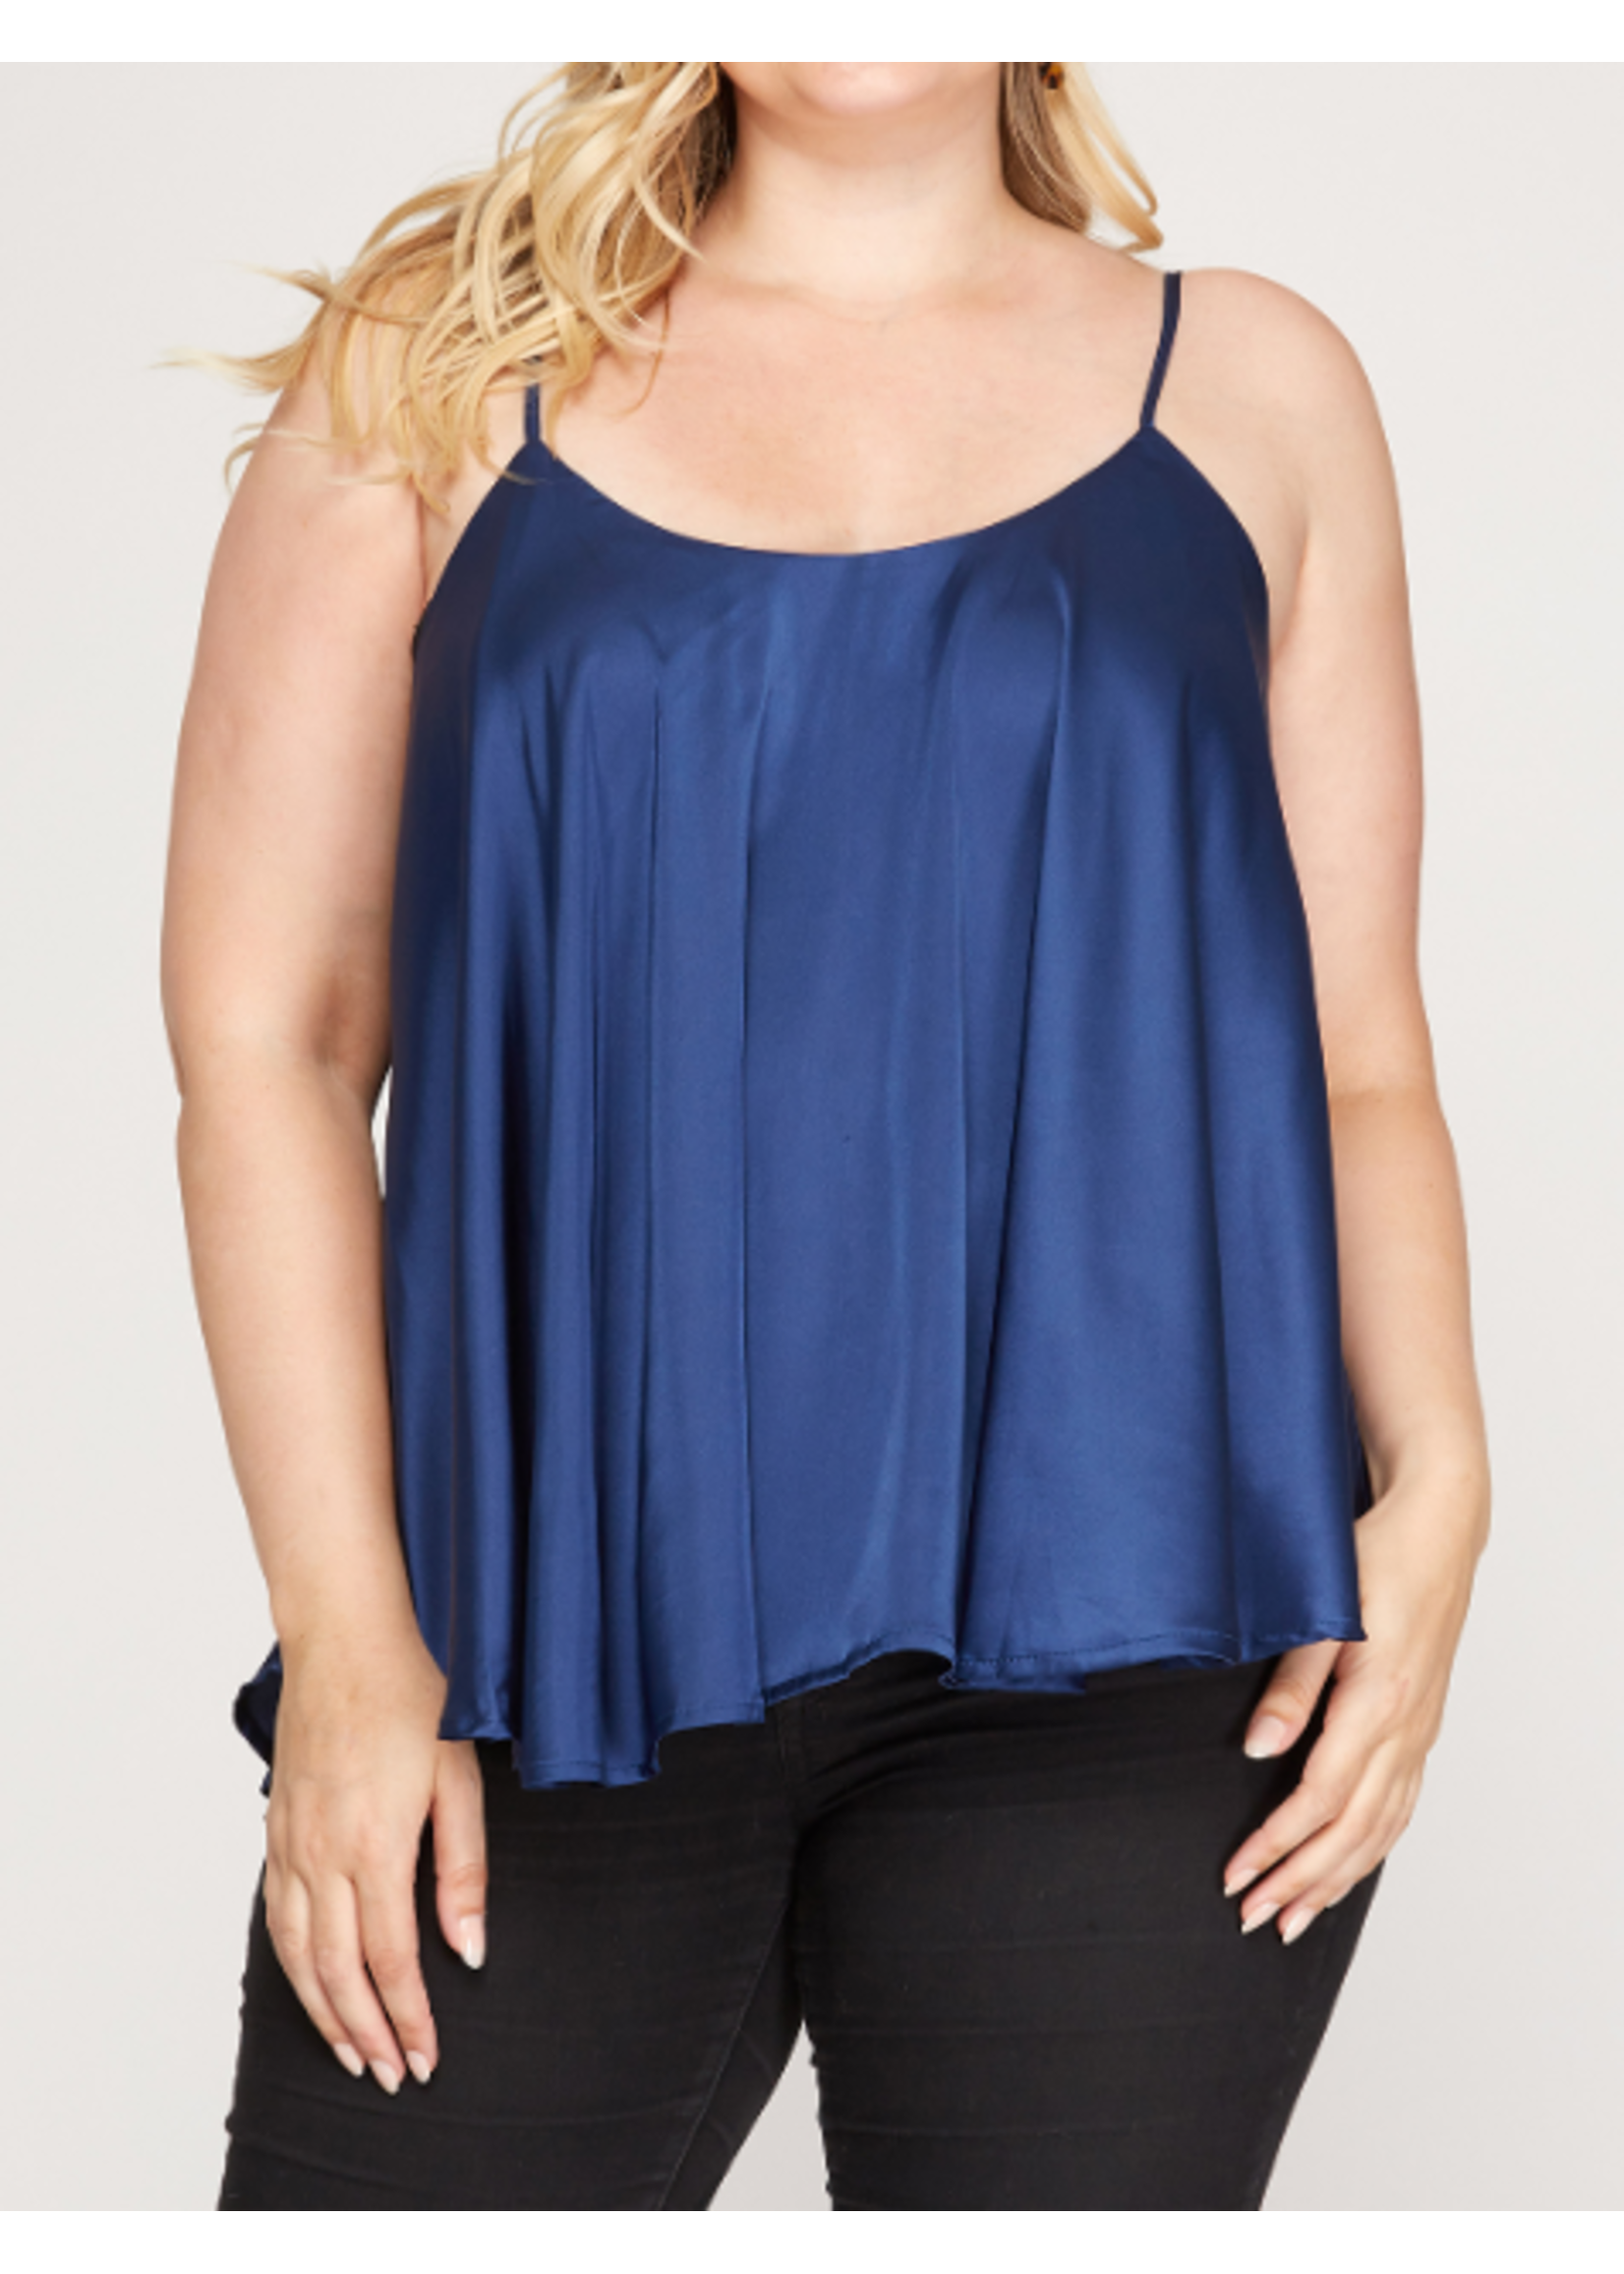 SSPSS8033 - ROUNDED SWEEP HEM SATIN CAMI TOP